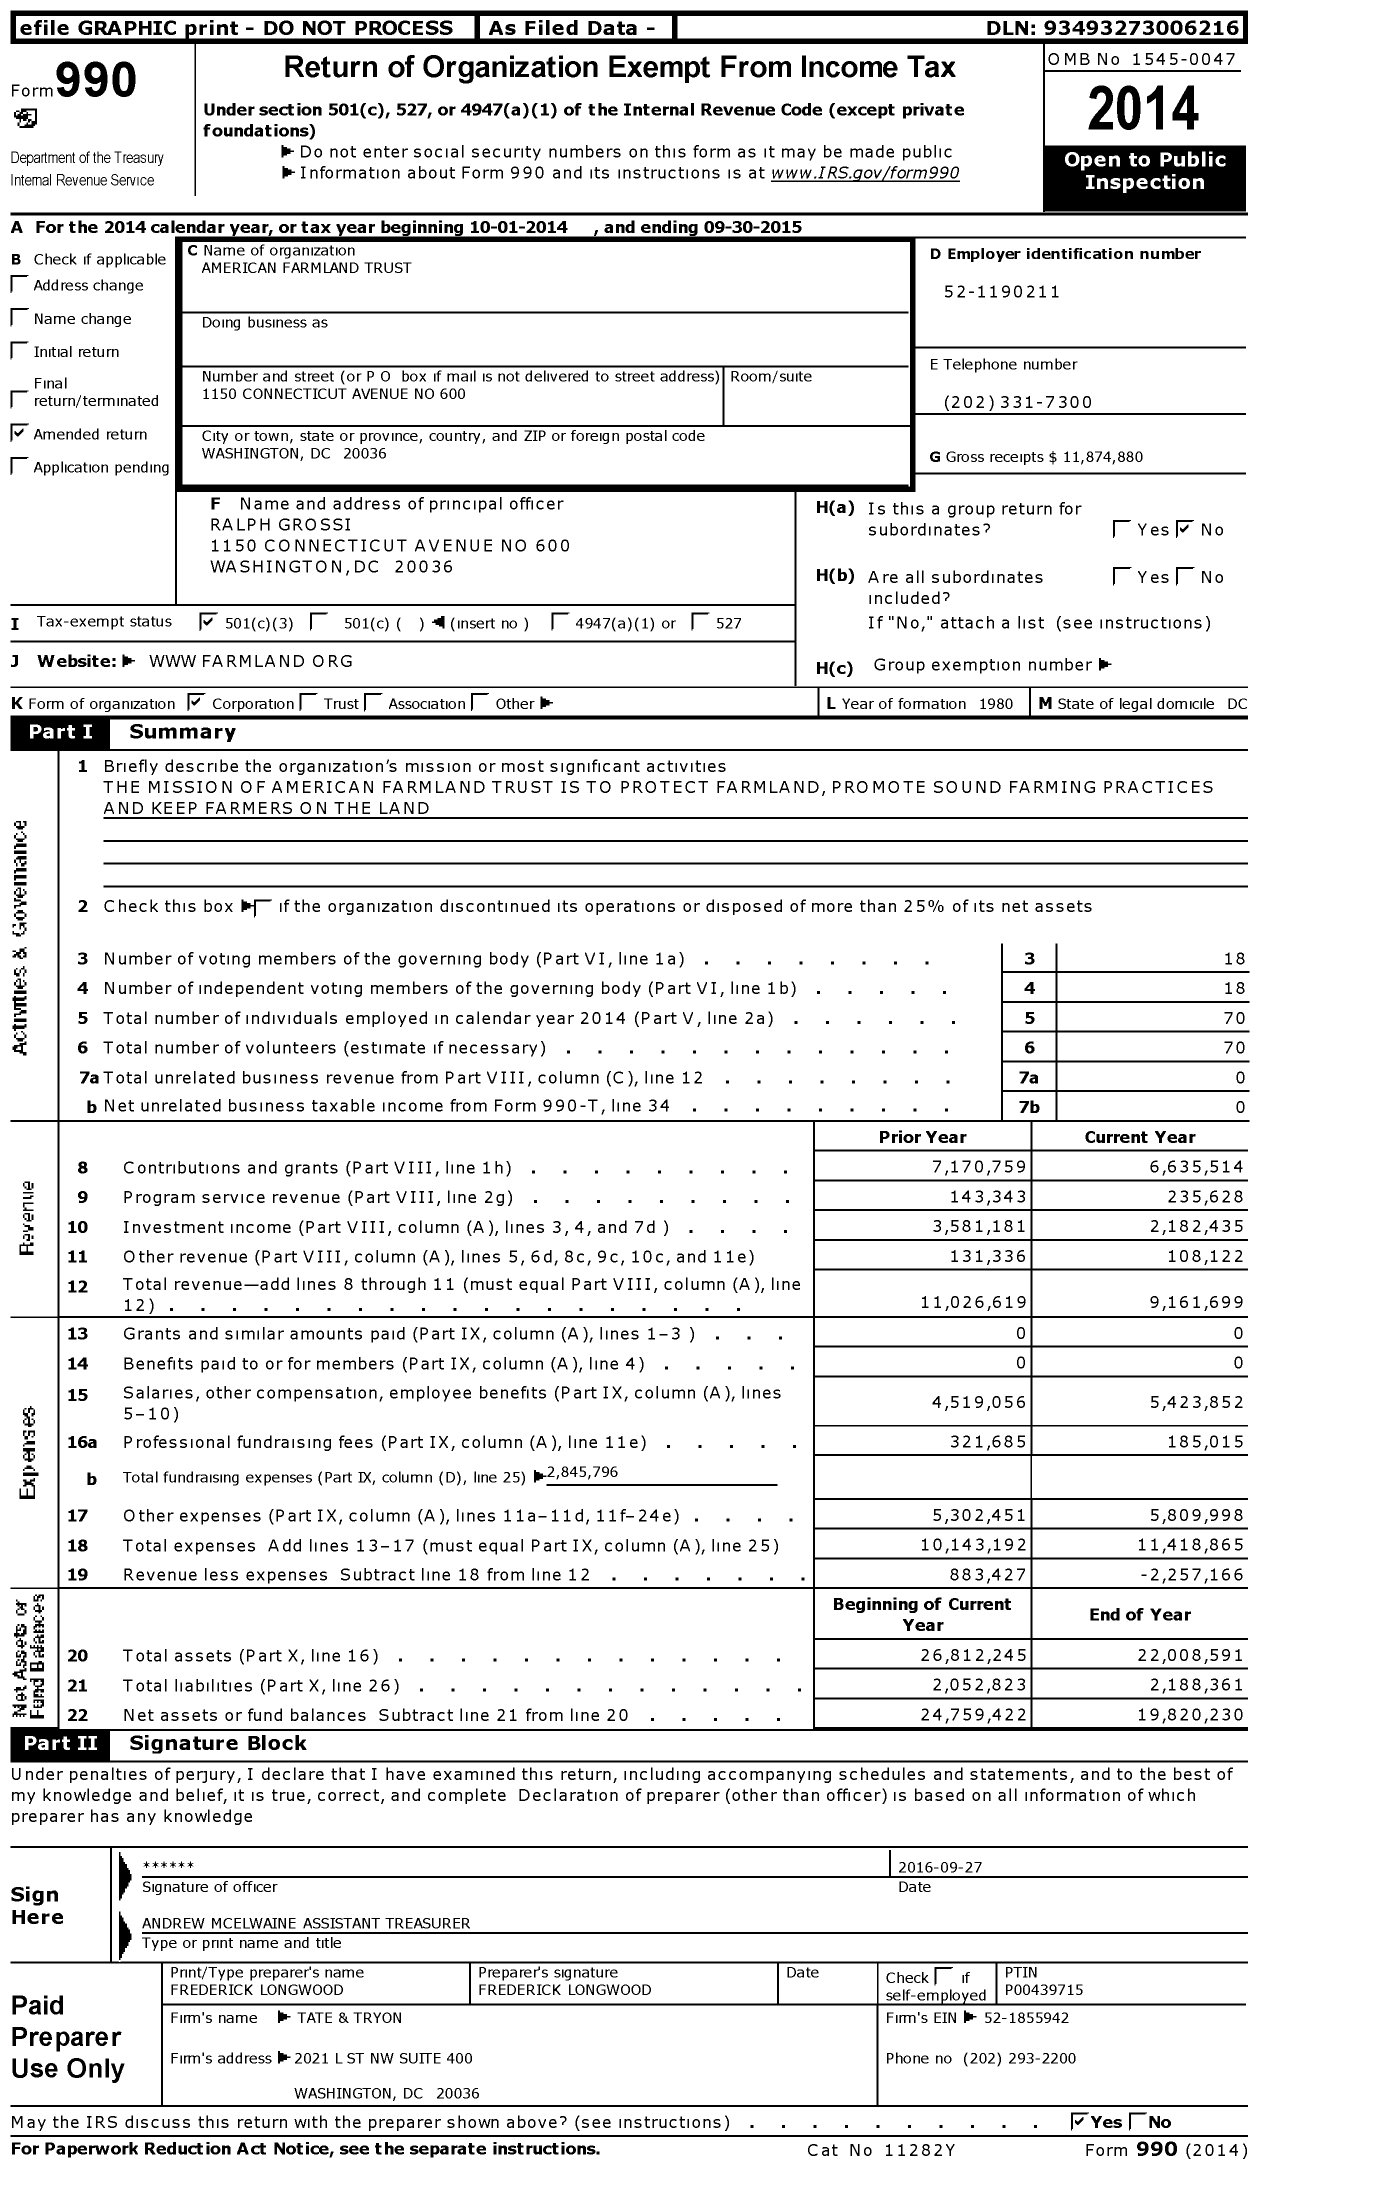 Image of first page of 2014 Form 990 for American Farmland Trust (AFT)